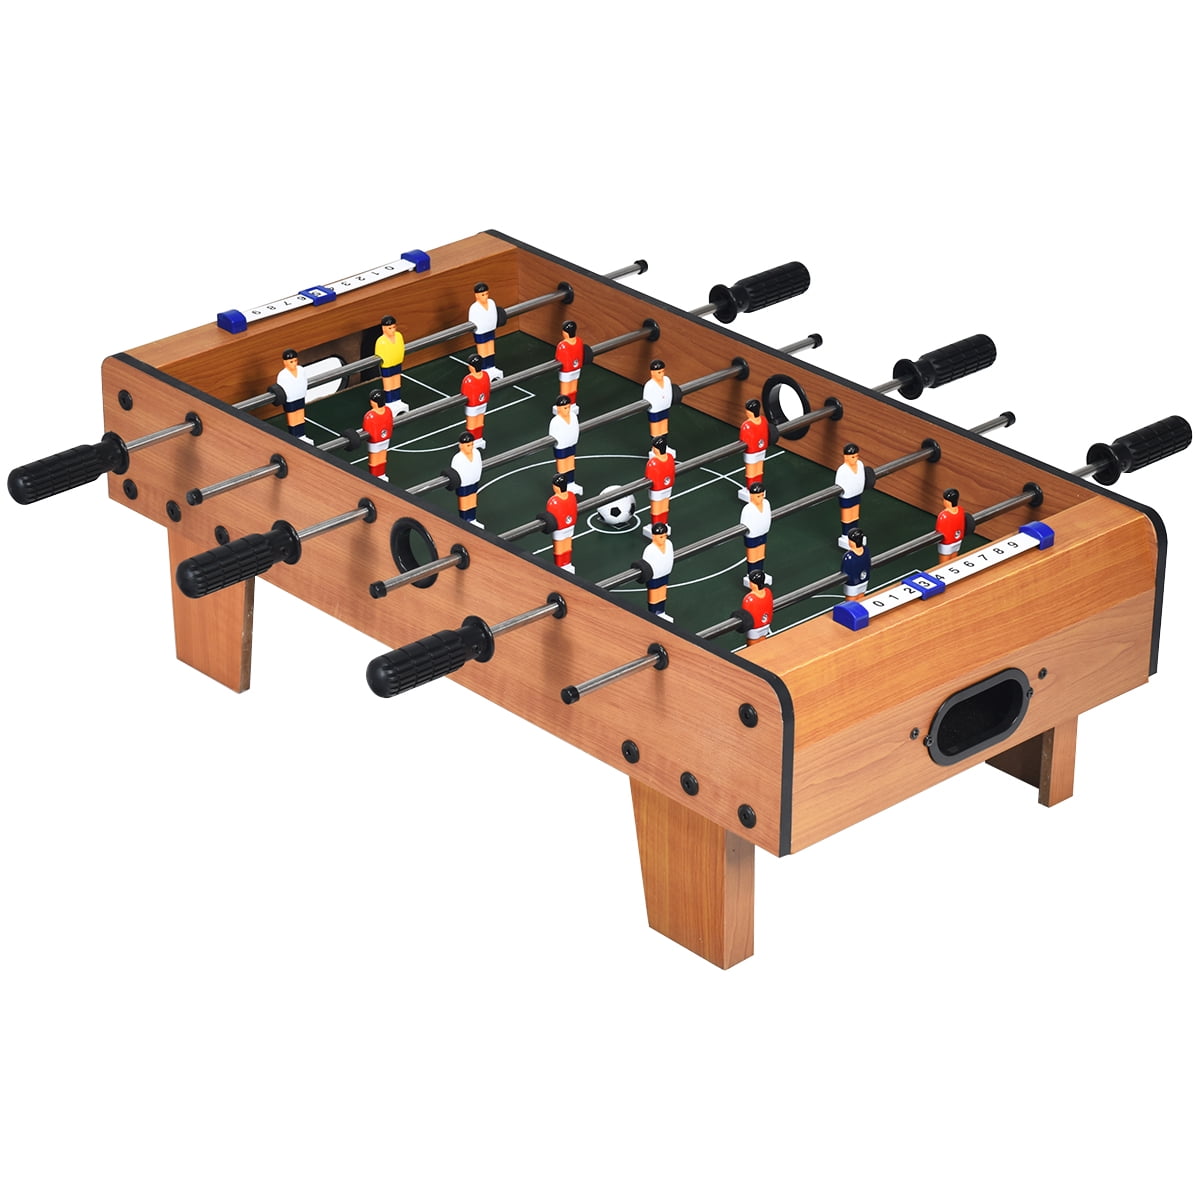 20" Foosball Table Top with LED lights Game Soccer Football Sports Indoor Game 